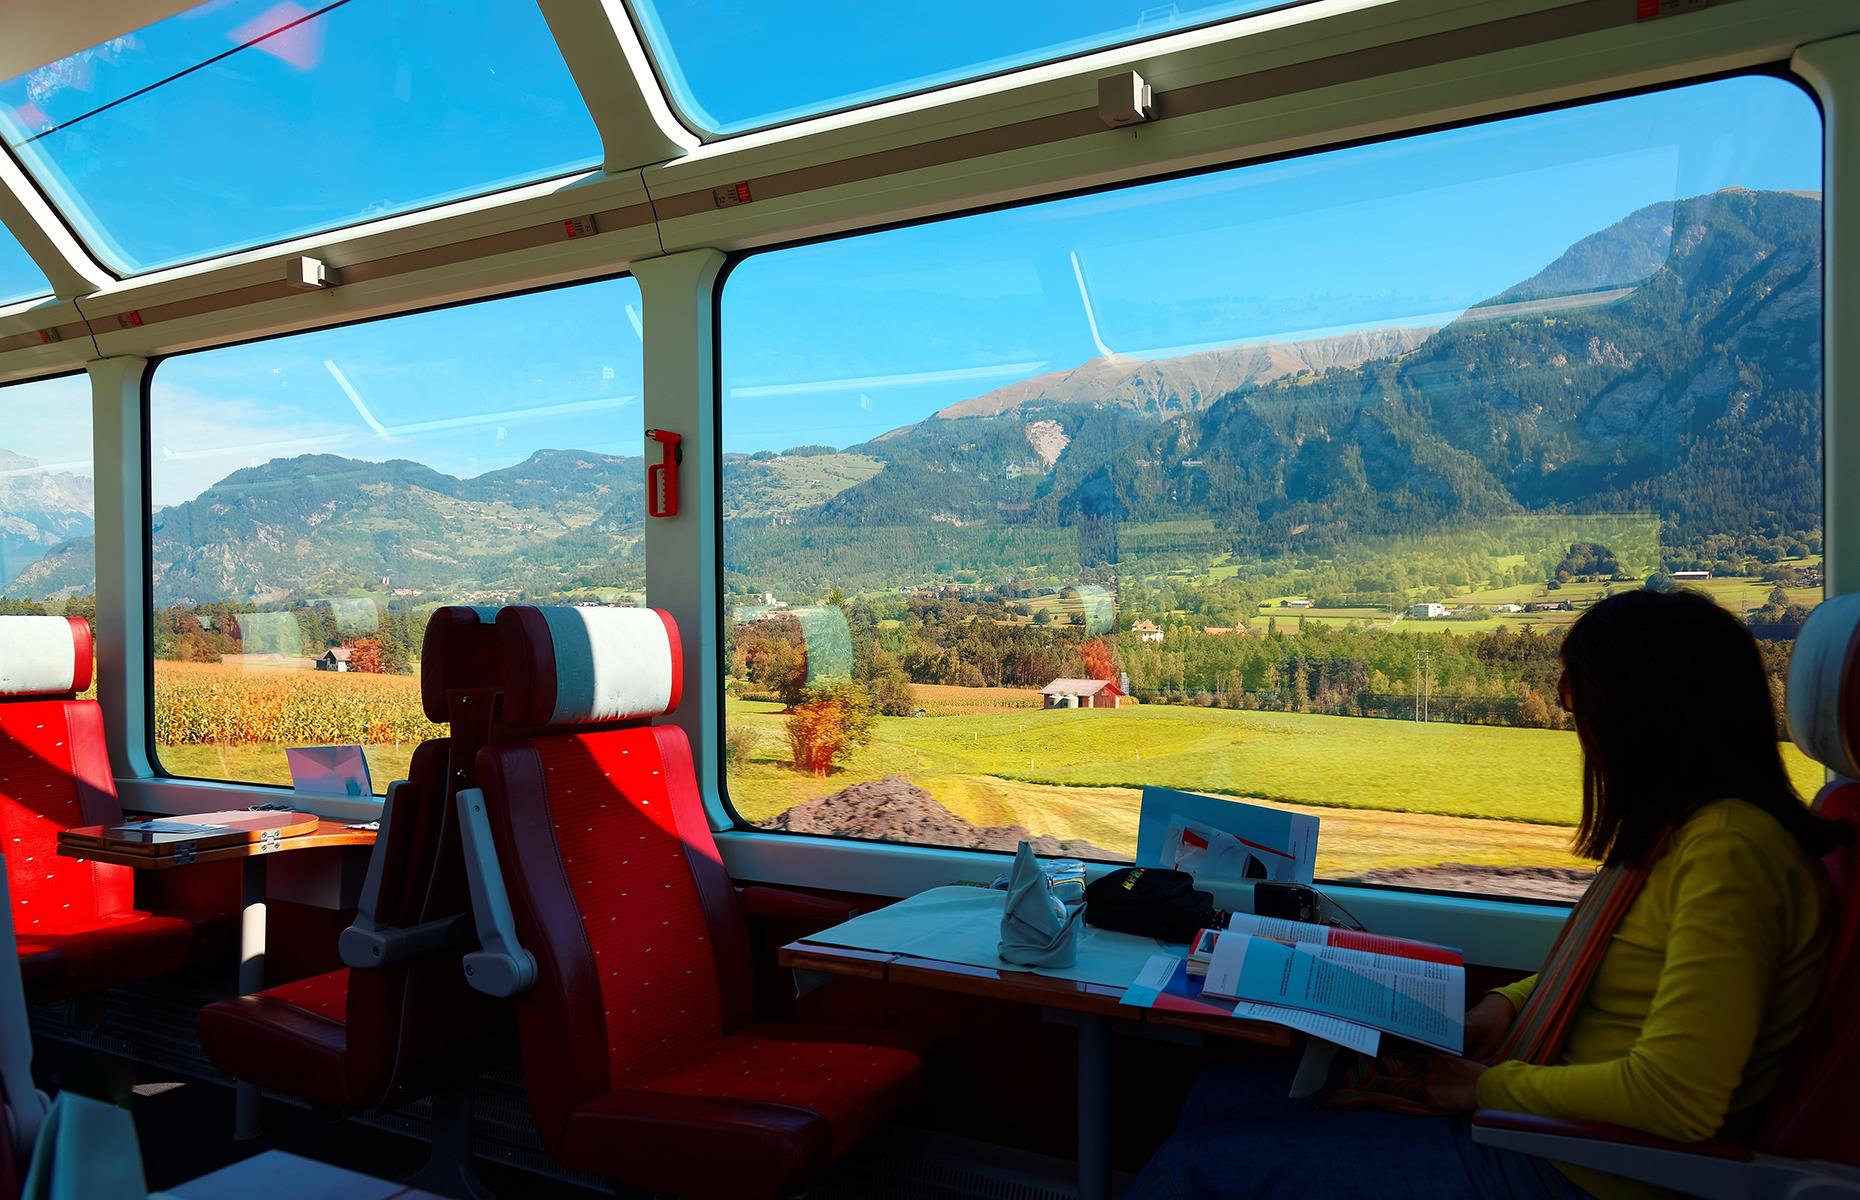 <p>Although you might expect to have to pay dearly for such a stunning train ride, the journey will only set you back around £137 ($166) for a one-way, second-class ticket. You can choose to pay a £44 ($53) supplement for a three-course lunch or you're free to bring your own food, drink and even a bottle of wine on board. There is a food service car and staff come down the train taking orders. The panoramic coaches were specially built for the service in 2006.</p>  <p><a href="https://www.loveexploring.com/galleries/148920/the-best-nofly-holidays-in-europe"><strong>Now check out the best no-fly holidays in Europe</strong></a></p>